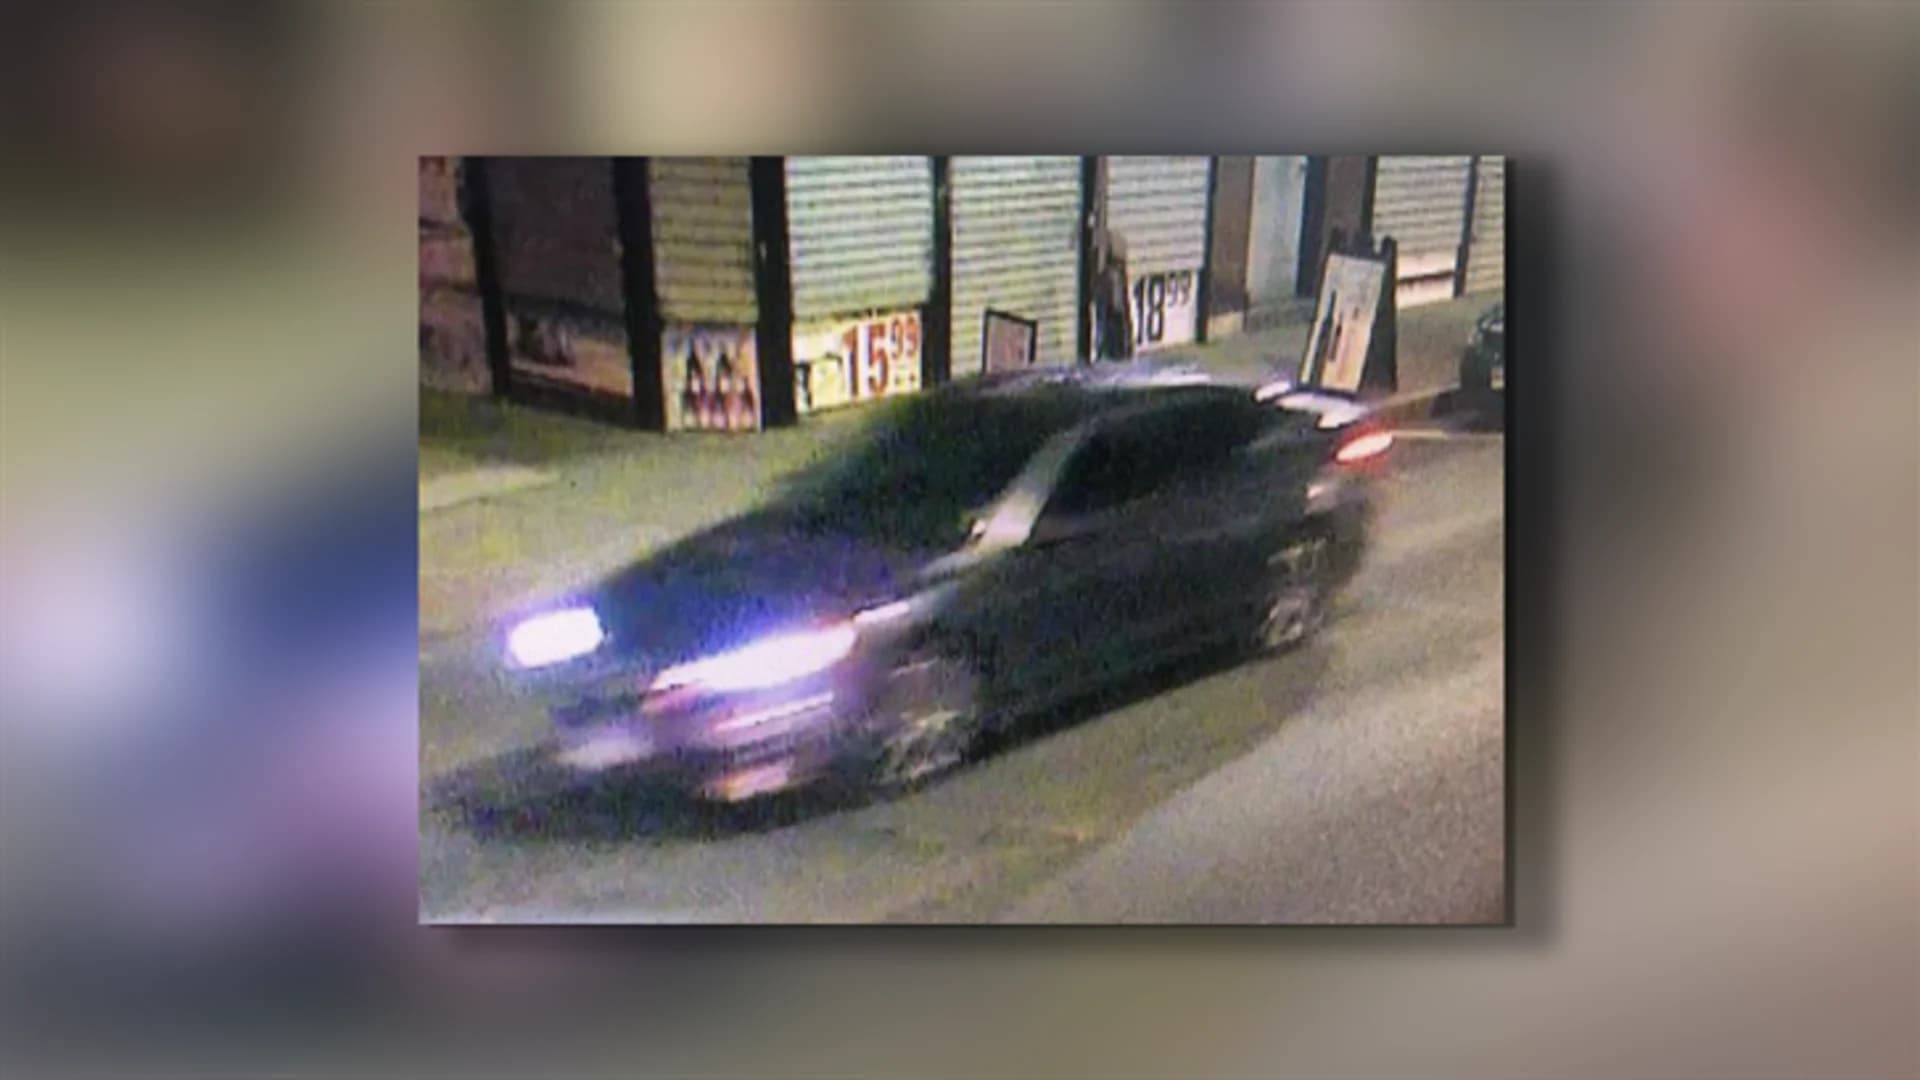 Police release image of hit-and-run car that struck Bridgeport firefighter